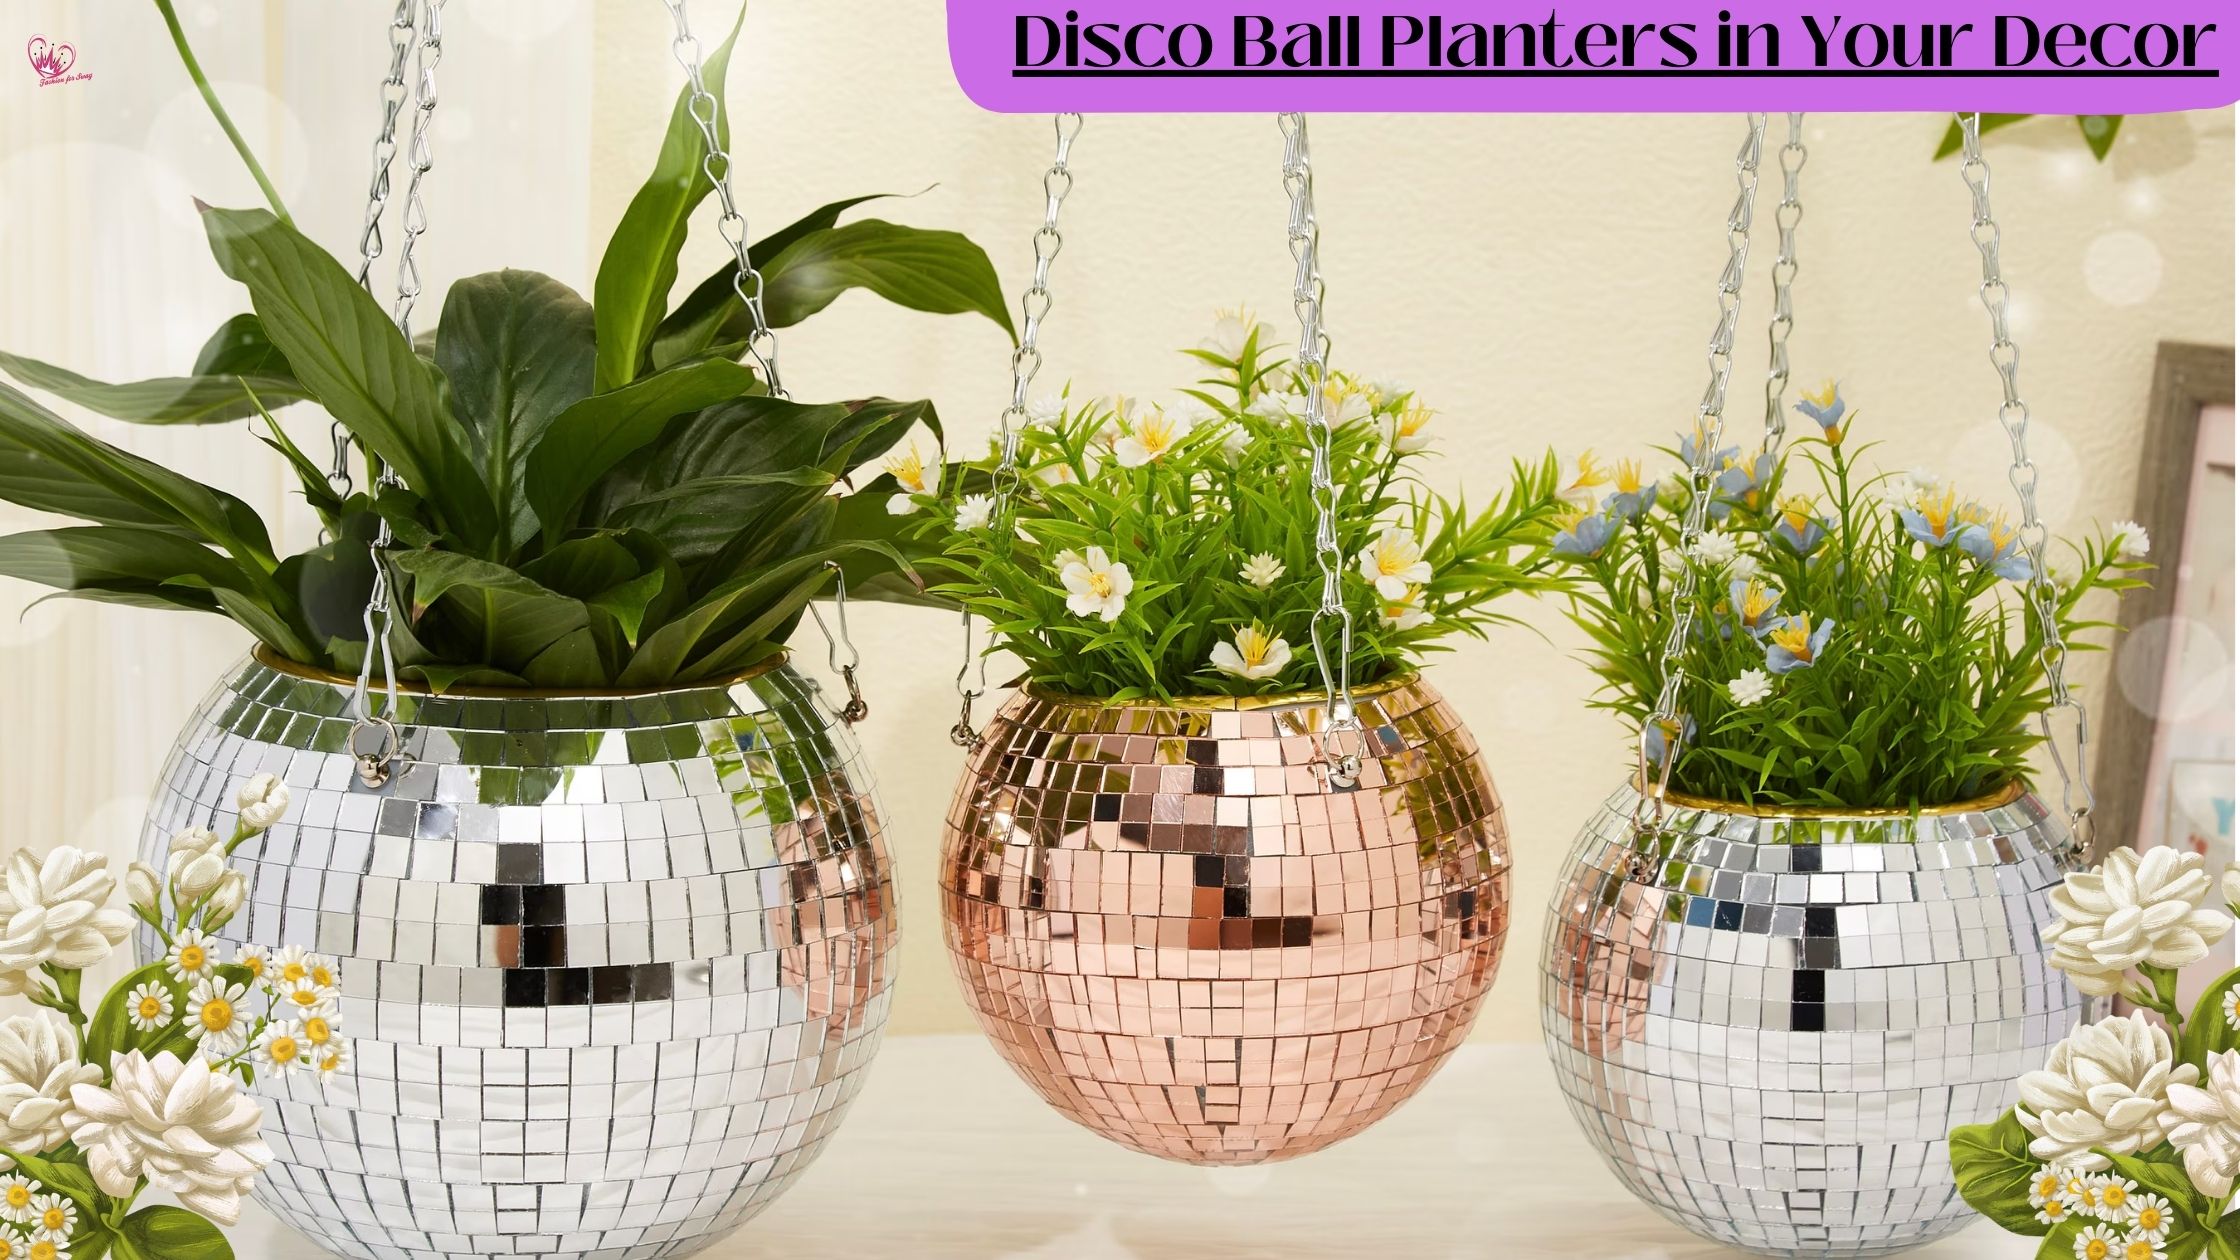 A Touch of Glitz: Incorporating Disco Ball Planters in Your Decor